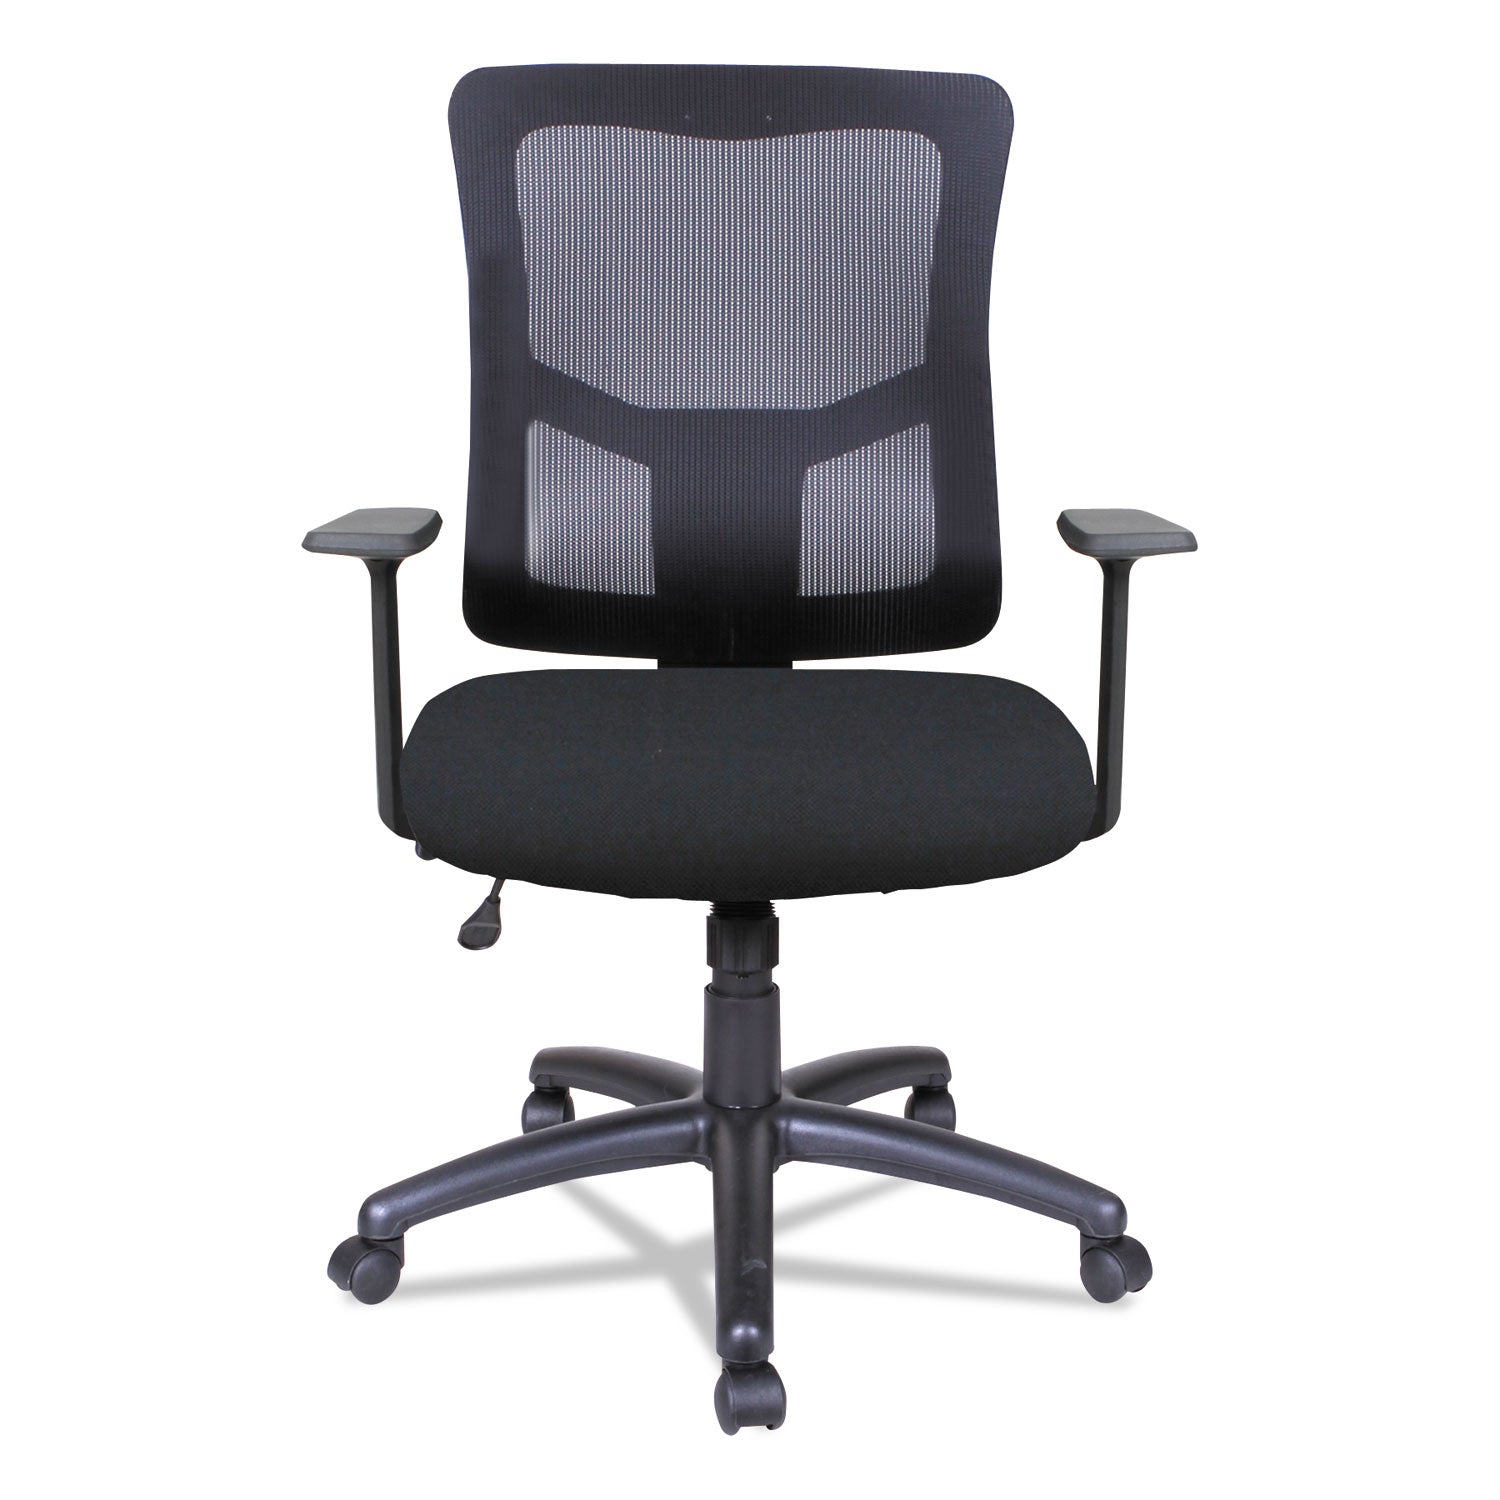 alera-elusion-ii-series-mesh-mid-back-swivel-tilt-chair-supports-up-to-275-lb-1811-to-2177-seat-height-black_aleelt4214b - 2